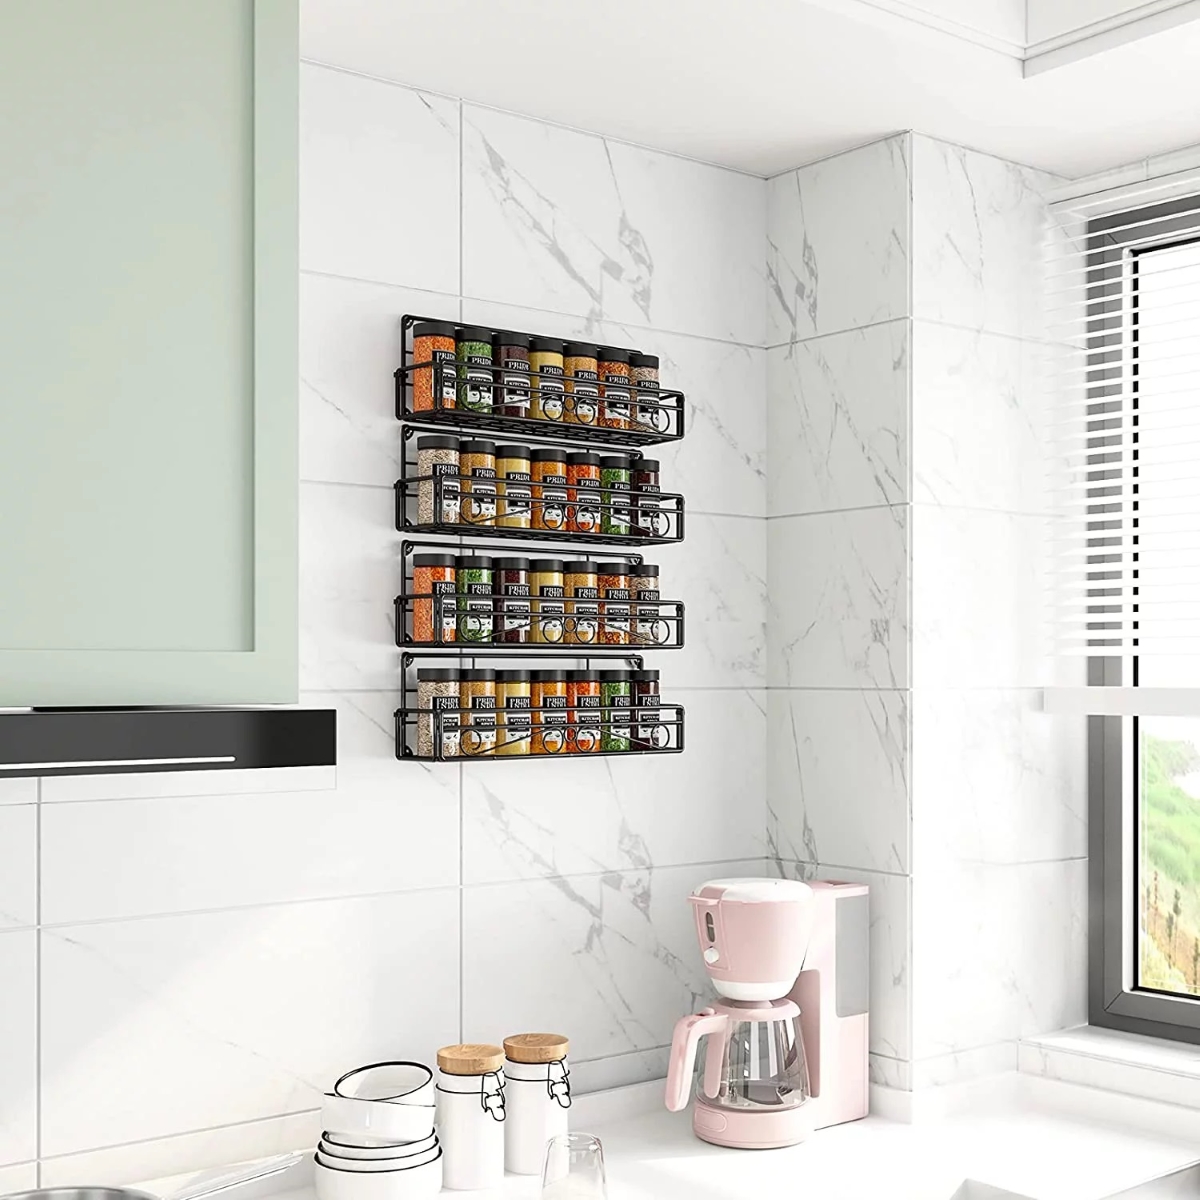 Black wall hung spice rack in modern kitchen